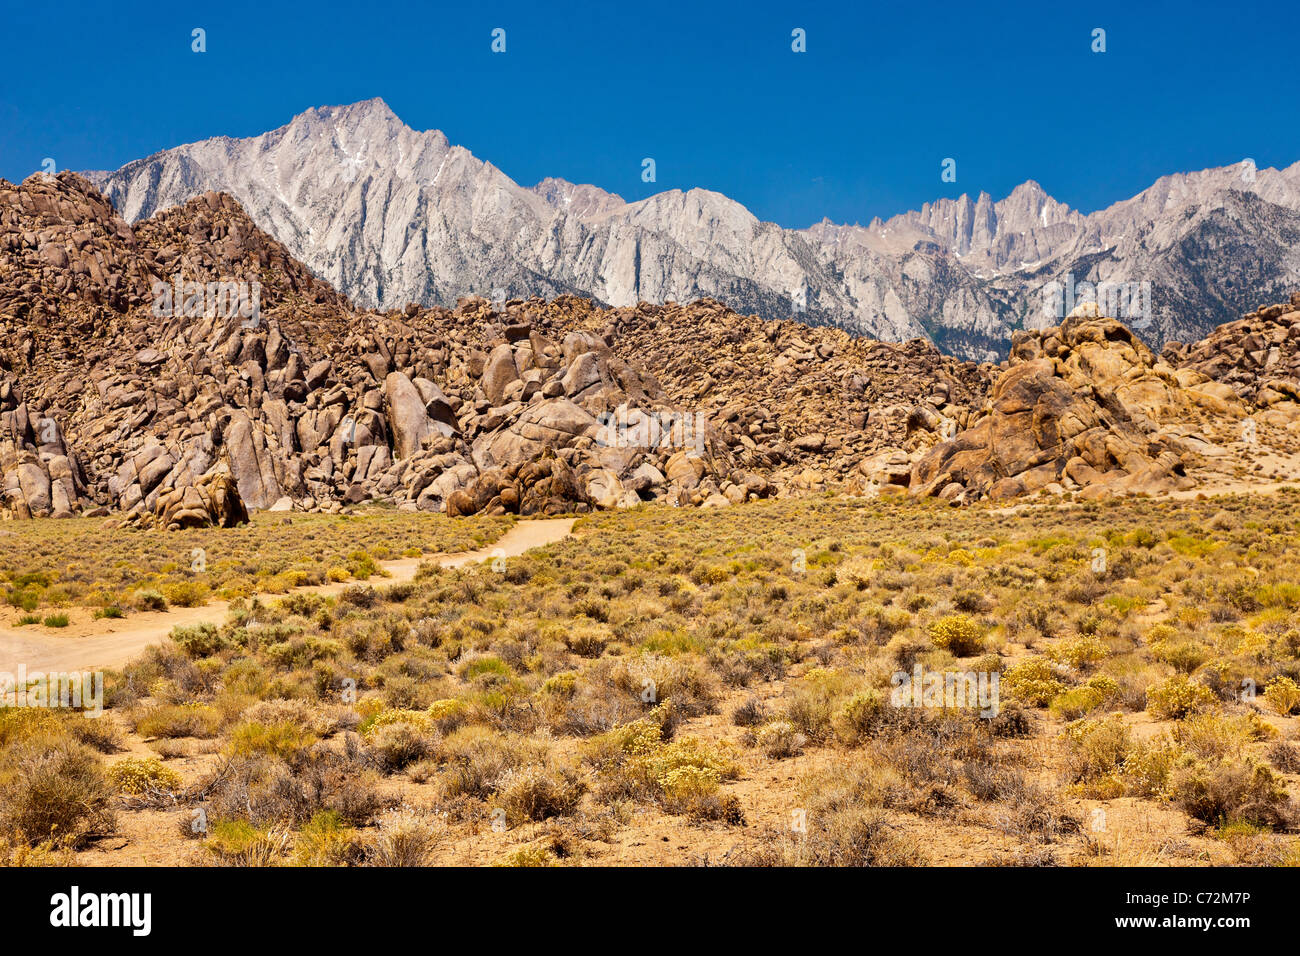 The Alabama Hills, backed by Lone Pine Peak (left) and Mount Whitney (right) in the Sierra Nevada, California, USA. JMH5328 Stock Photo